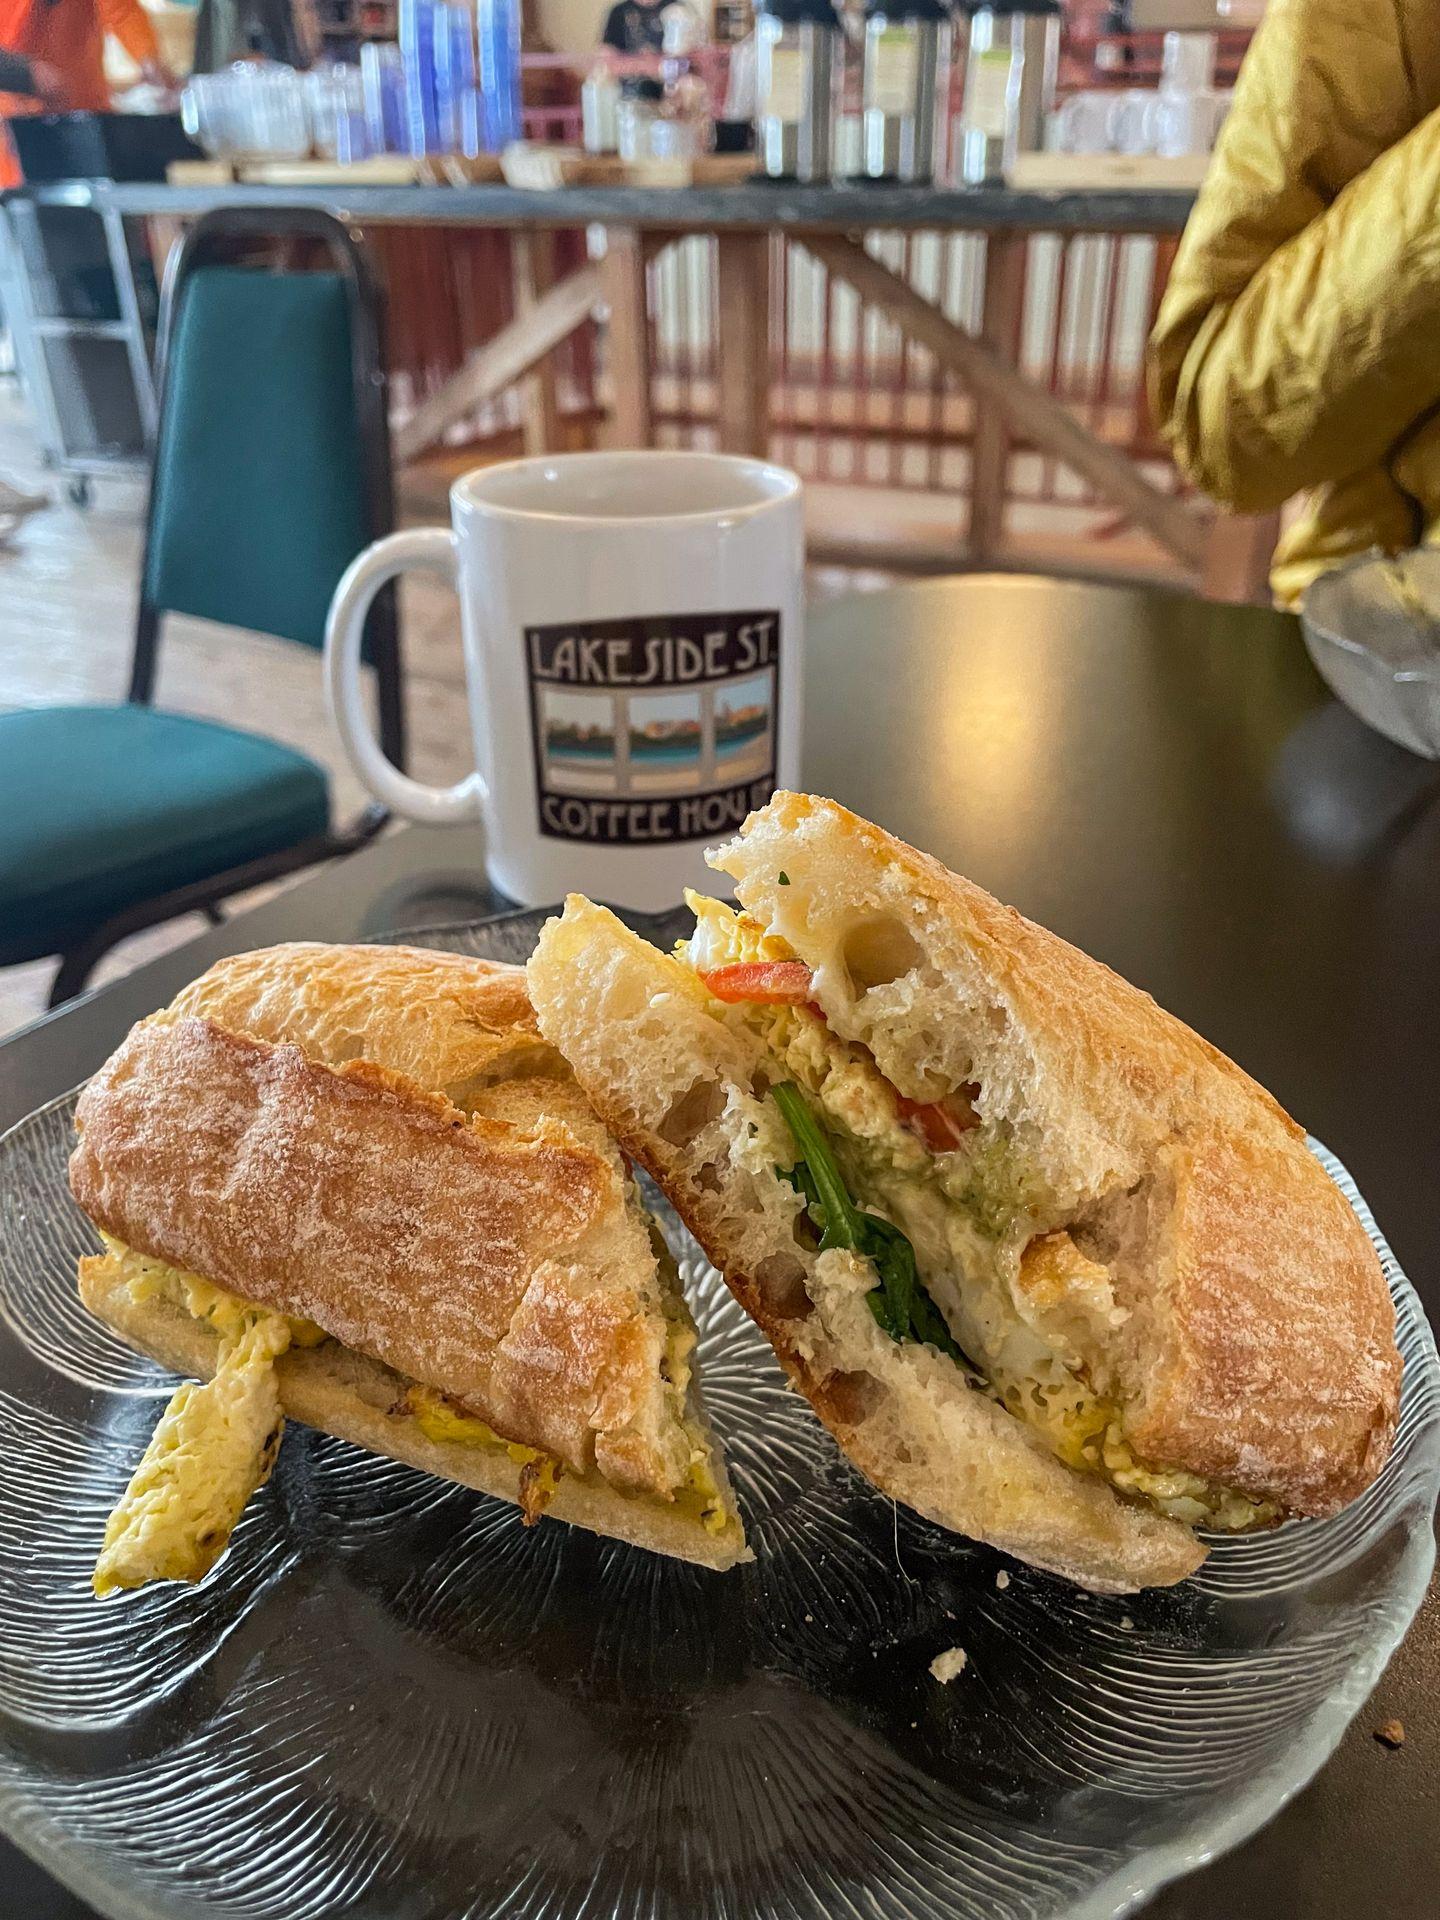 A sandwich on ciabatta bread with a mug behind it sitting on the table at Lakeside Coffee.